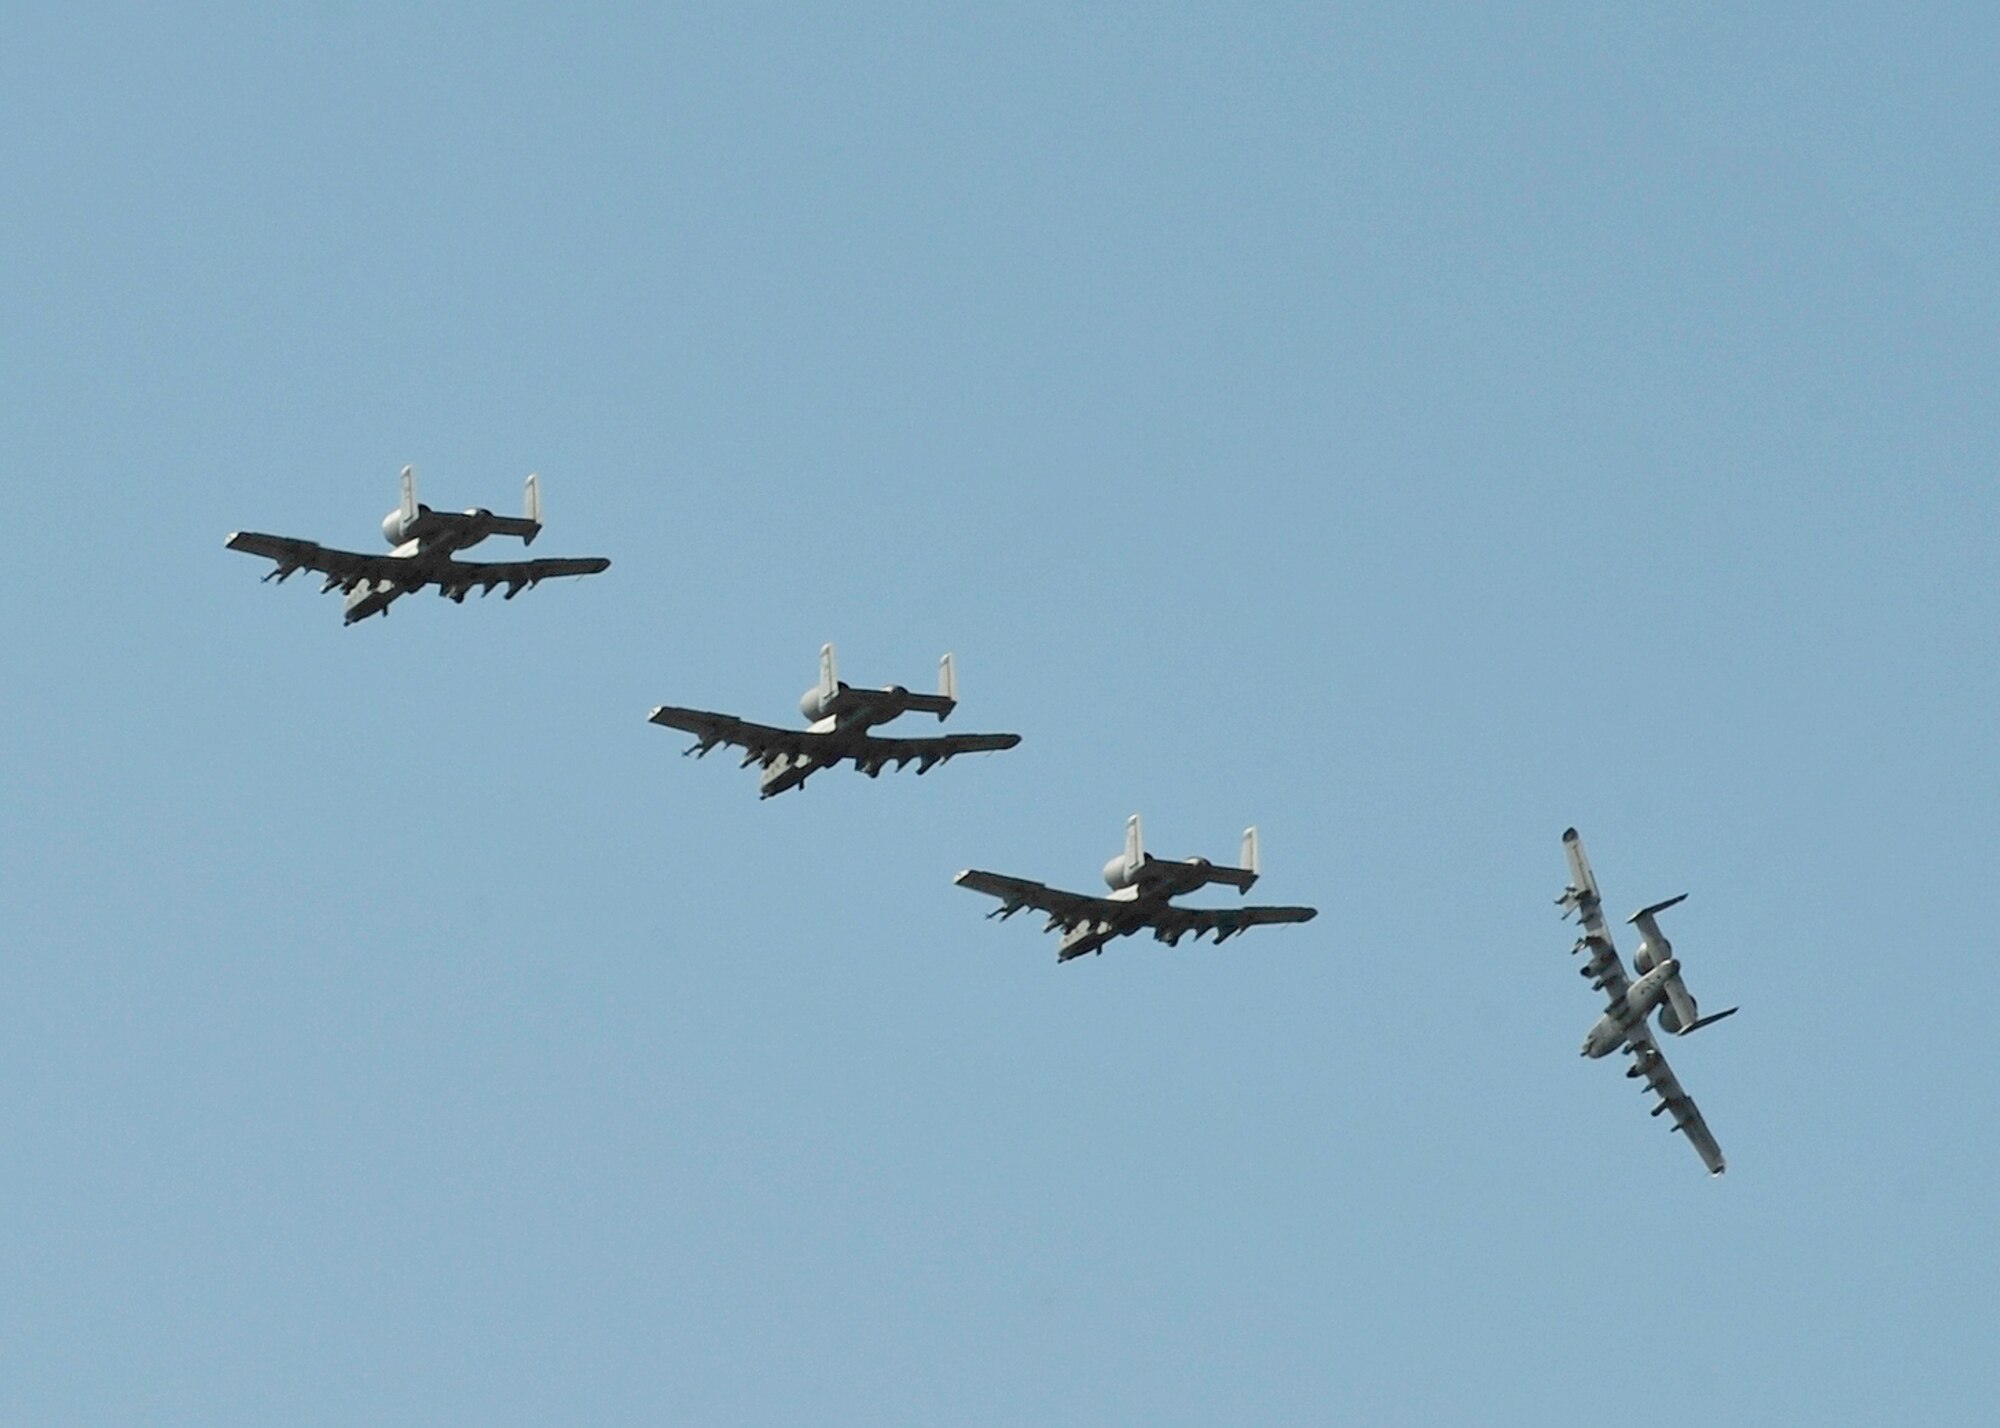 Four A-10 Thunderbolts assigned to the 354th Fighter Squadron, Davis-Monthan Air Force Base, Ariz., fly in formation before landing during RED FLAG-Alaska 14-1 May 14, 2014, Eielson Air Force Base, Alaska. The 354th FS sent maintainers and pilots, as well as eight A-10 aircraft to Eielson to participate in RF-A through May 23. (U.S. Air Force photo by Senior Airman Ashley Nicole Taylor/Released)